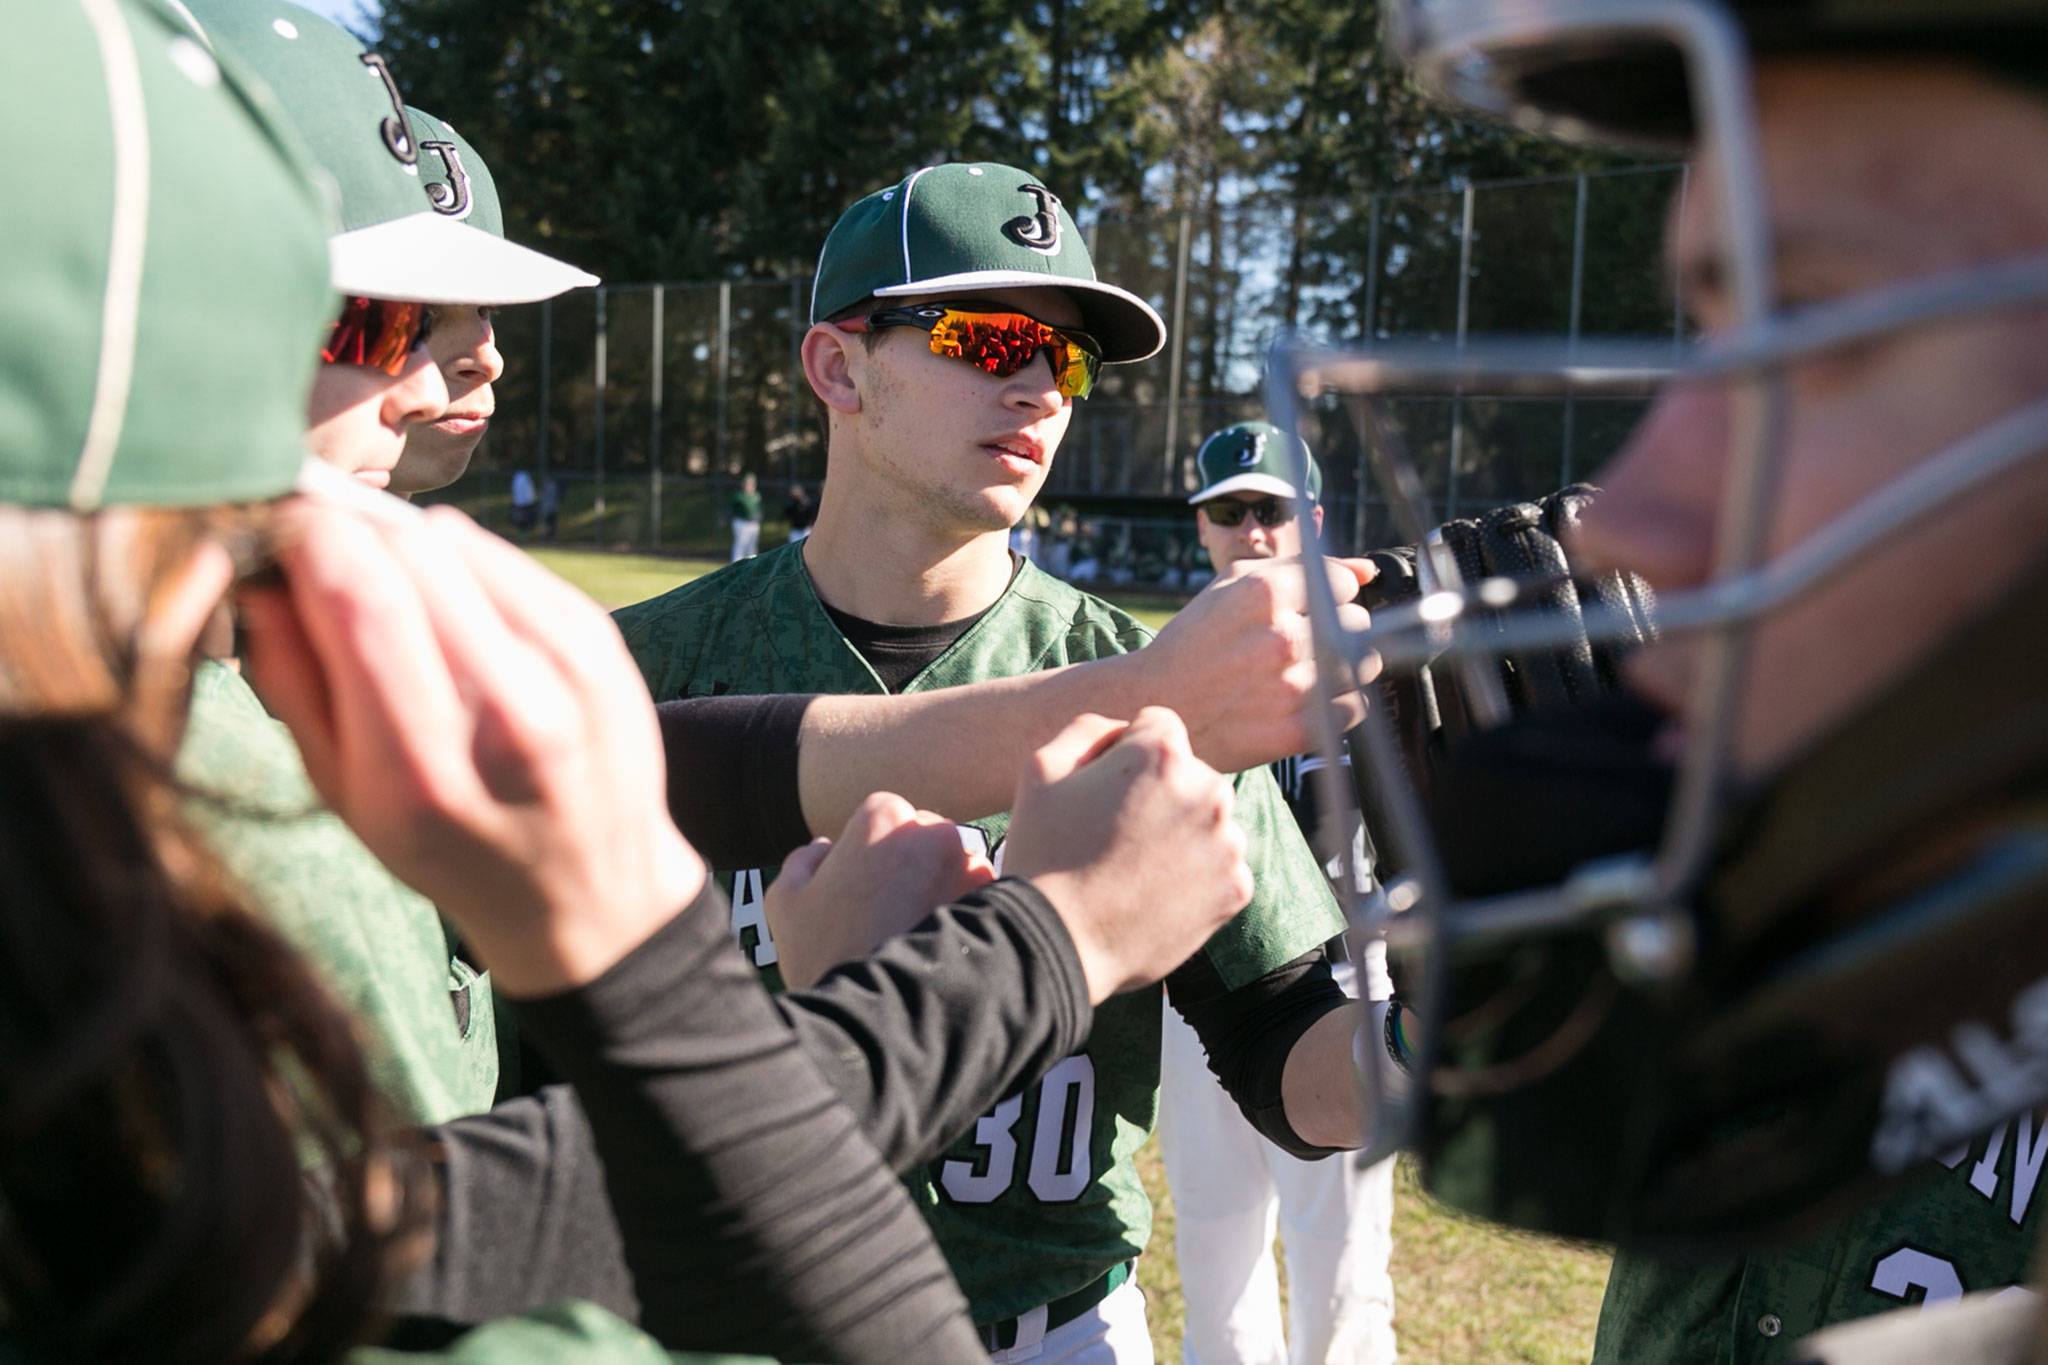 Jackson senior outfielder Carter Booth (center) rallies the team before a game against Marysville Getchell on March 15, 2018, in Mill Creek. (Kevin Clark / The Herald)